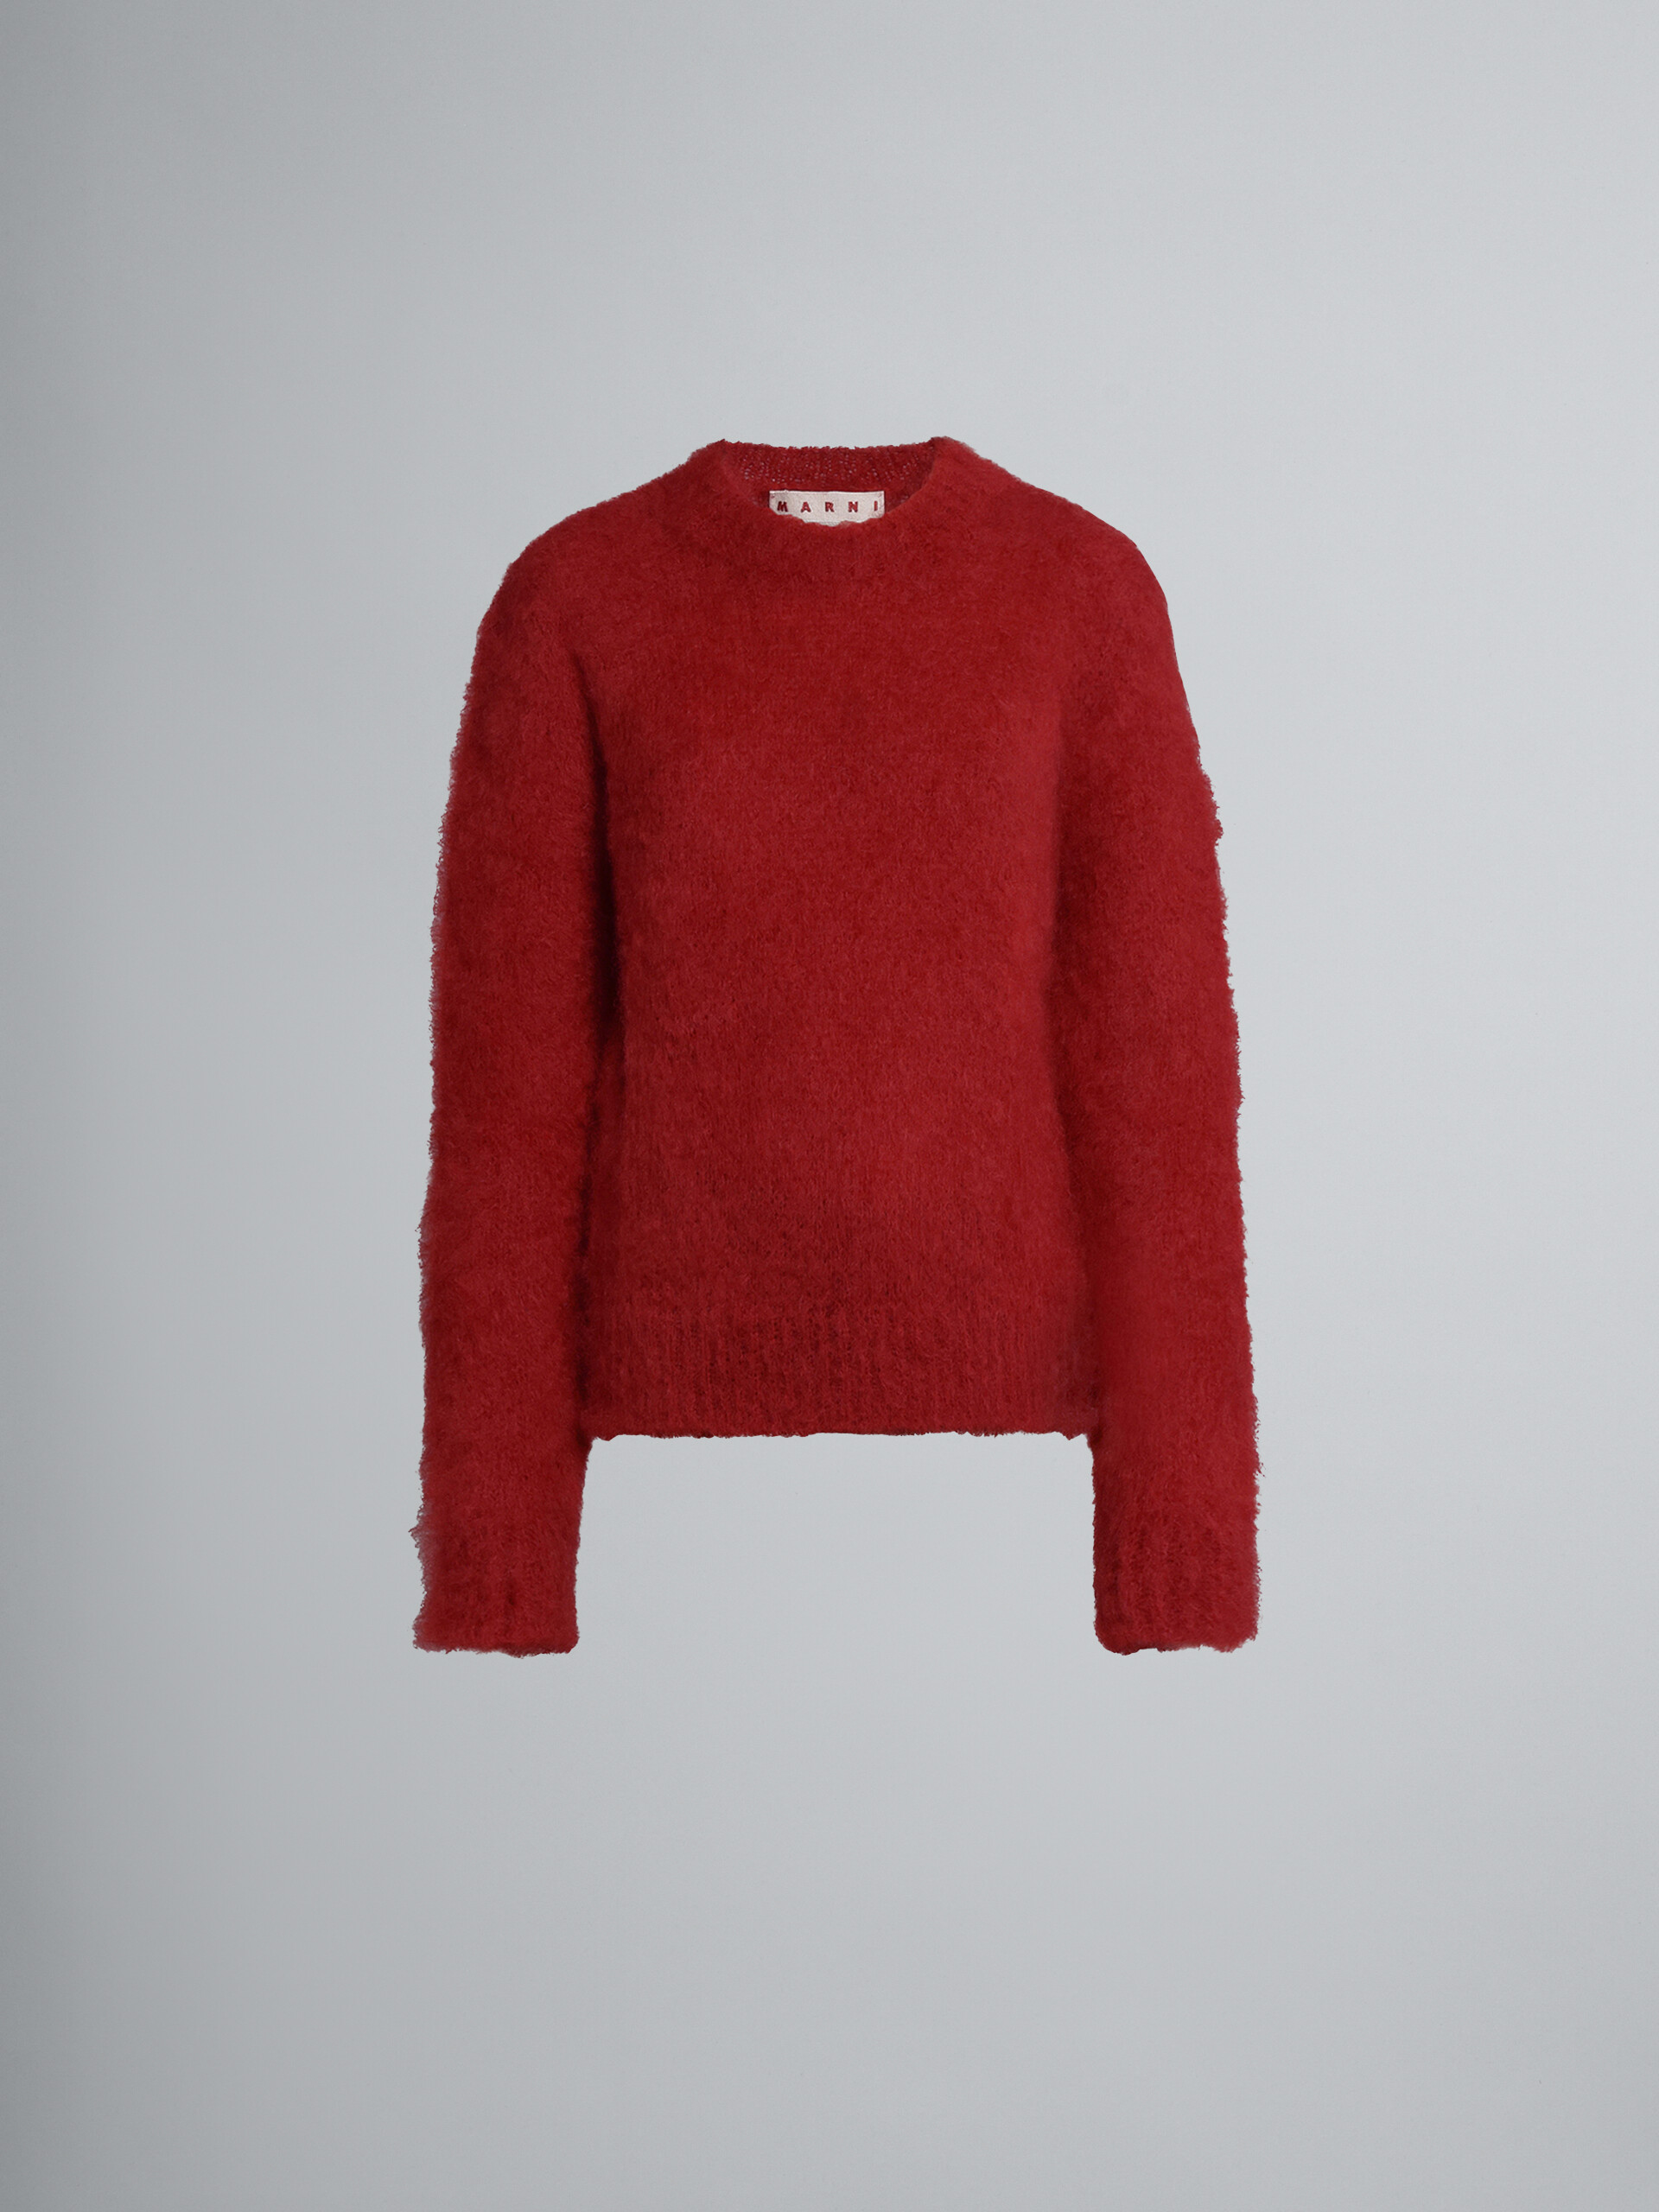 Red mohair and wool crewneck sweater - Pullovers - Image 1